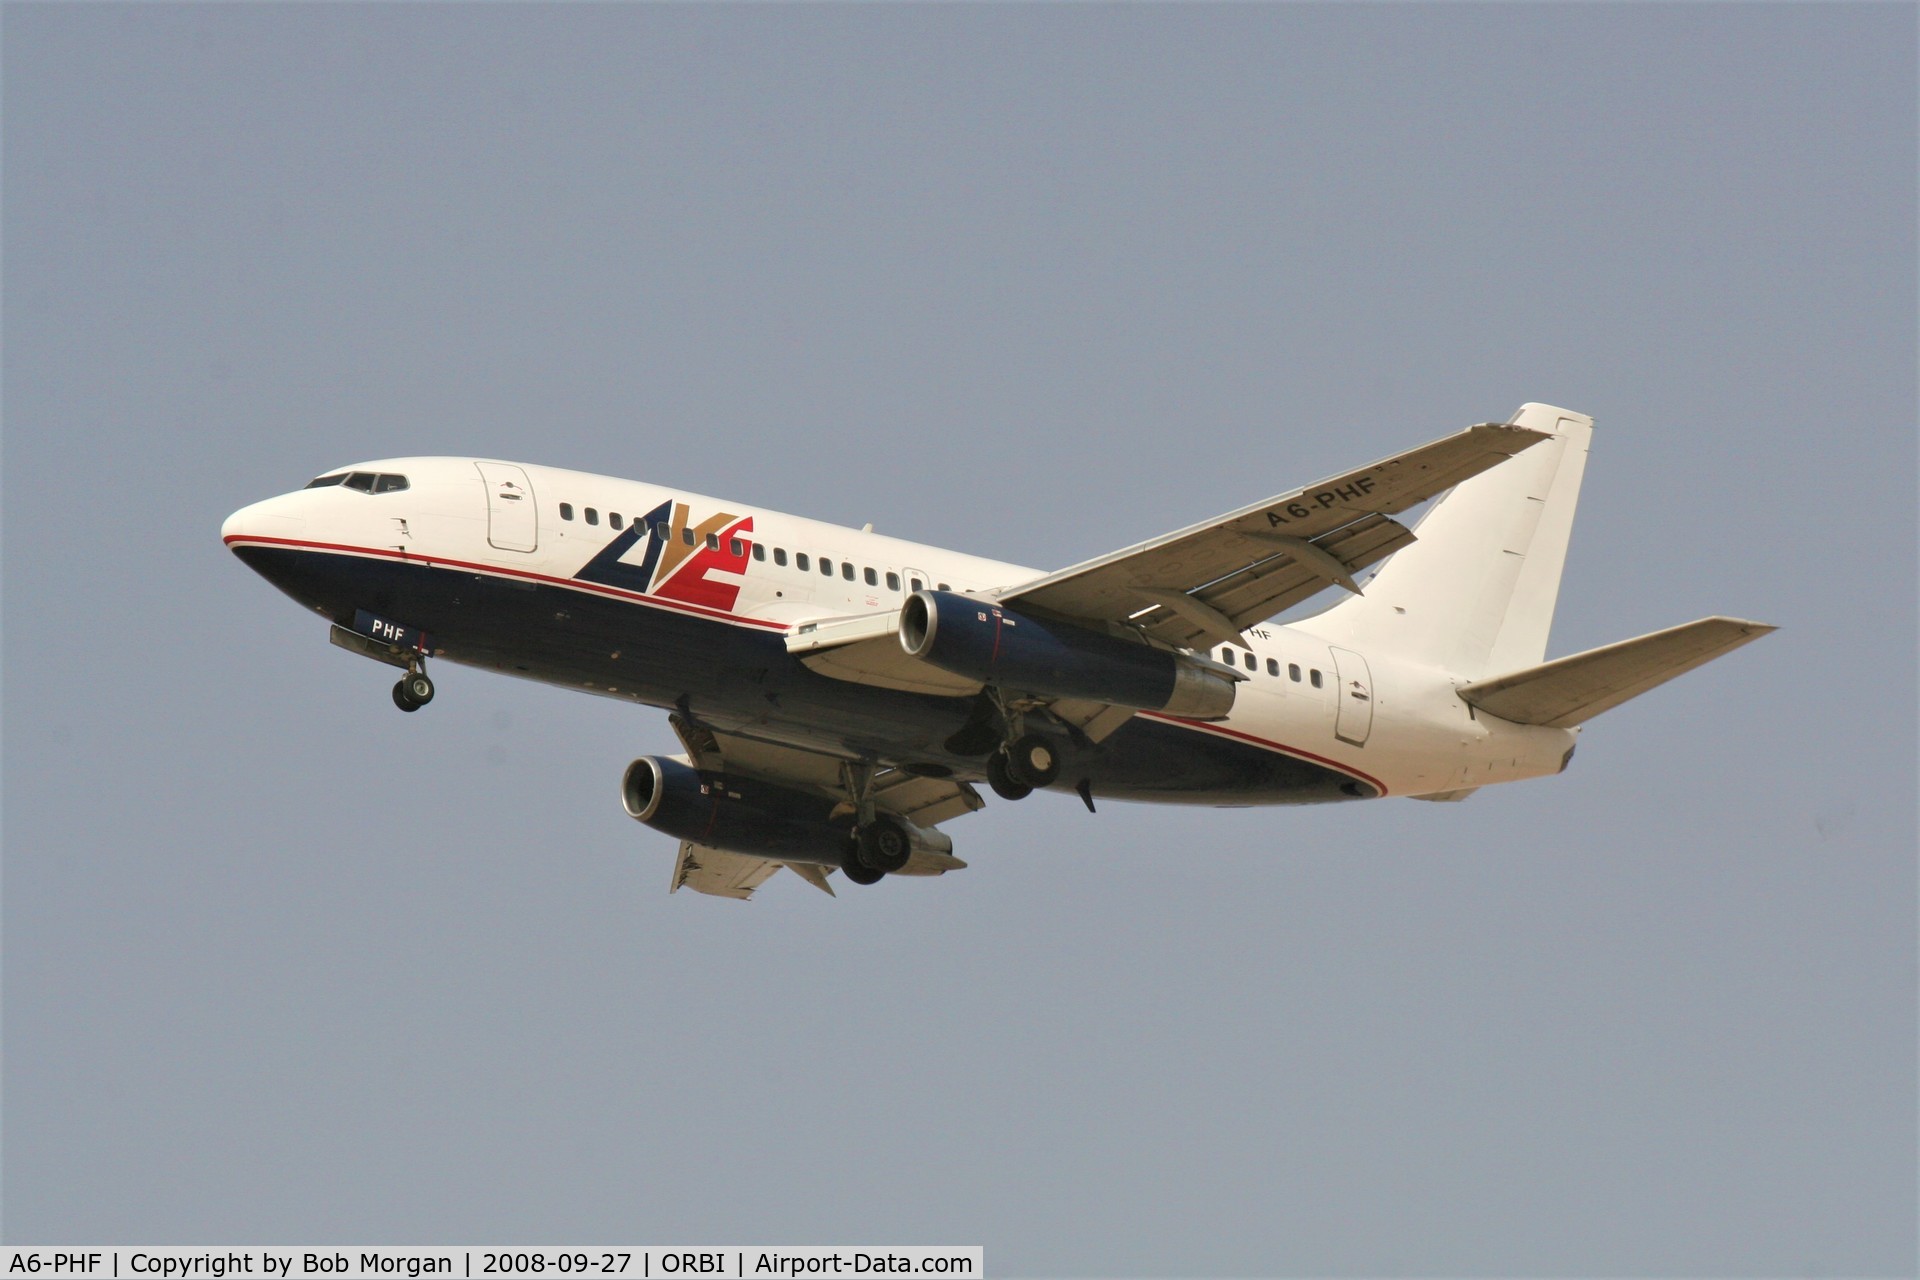 A6-PHF, 1978 Boeing 737-219 C/N 21645, AVE airlines A6-PHF landing at Baghdad International.